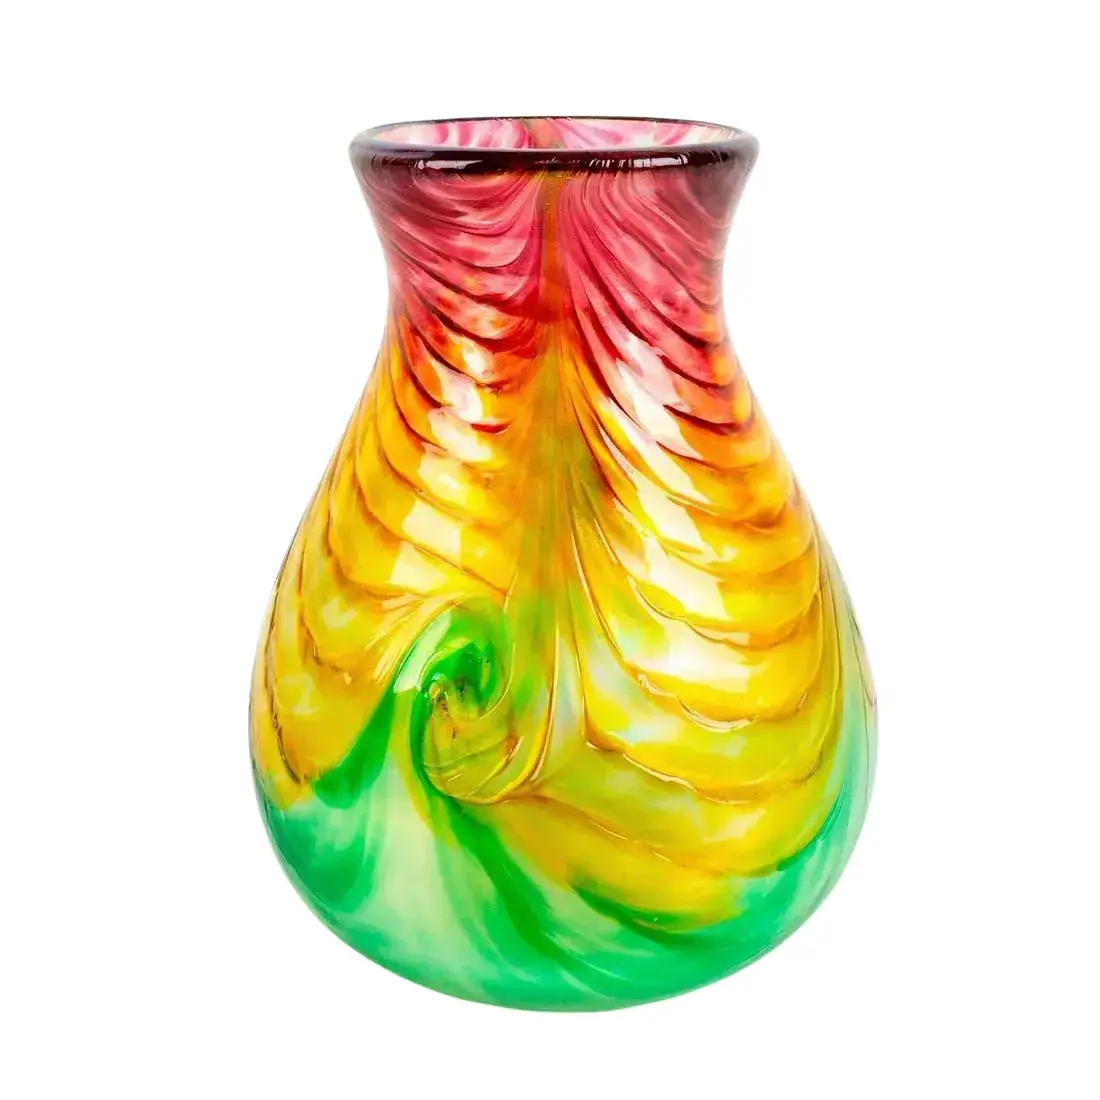 Ron Hinkle American Art Glass Vase Auction Daily